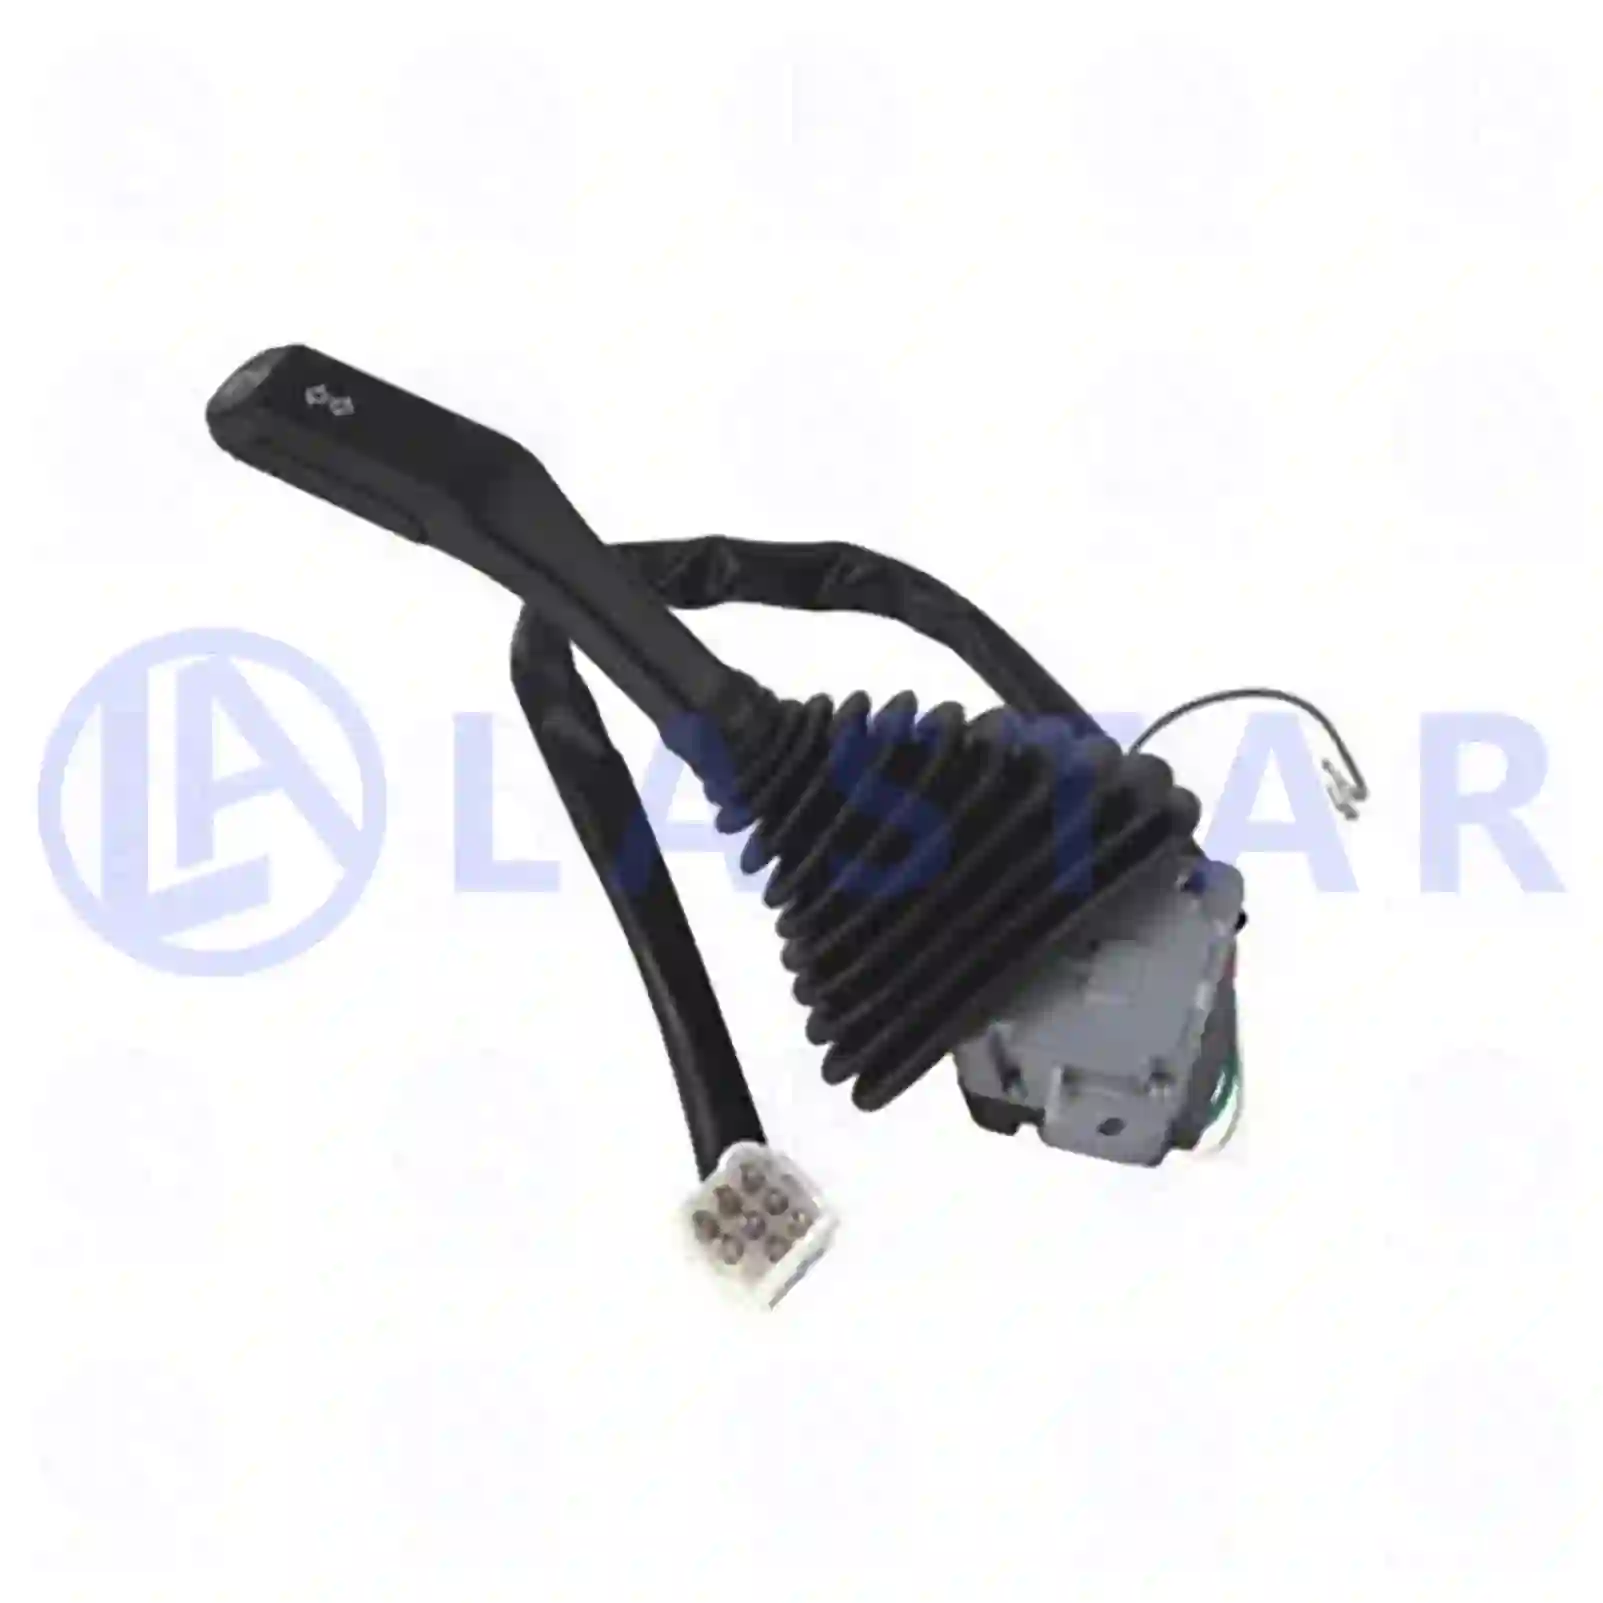 Steering column switch, turn signal, 77710935, 1358175, 360248, ZG20135-0008 ||  77710935 Lastar Spare Part | Truck Spare Parts, Auotomotive Spare Parts Steering column switch, turn signal, 77710935, 1358175, 360248, ZG20135-0008 ||  77710935 Lastar Spare Part | Truck Spare Parts, Auotomotive Spare Parts